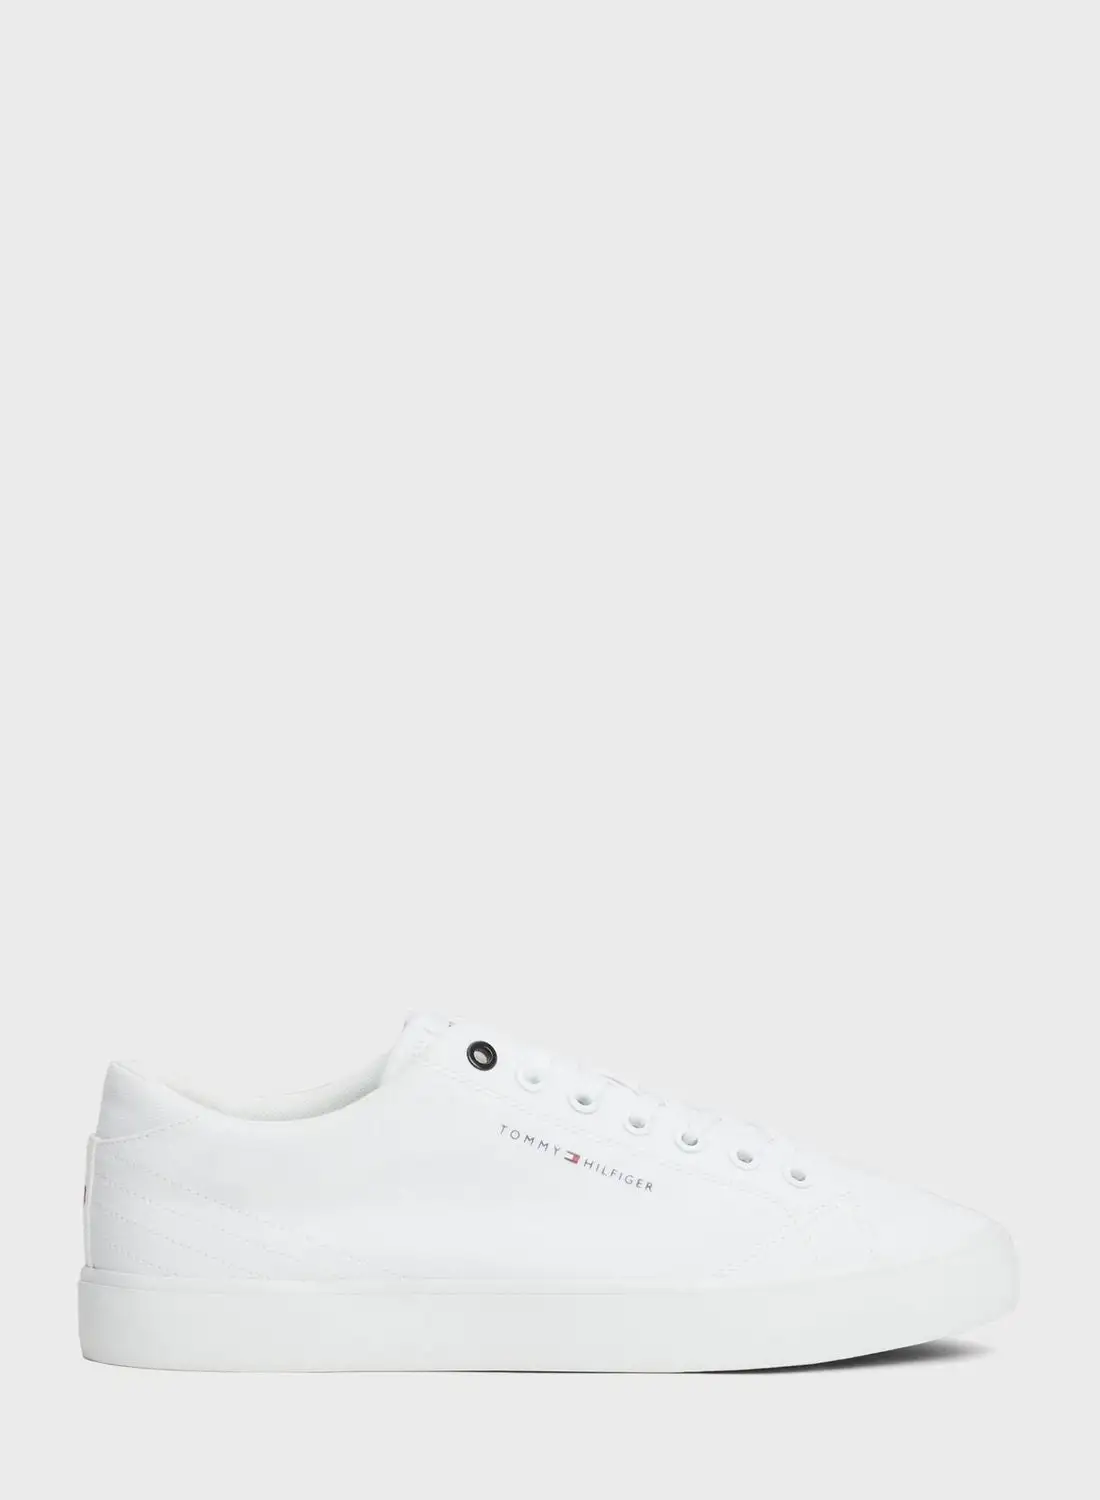 TOMMY HILFIGER Low Top Lace Up Sneakers